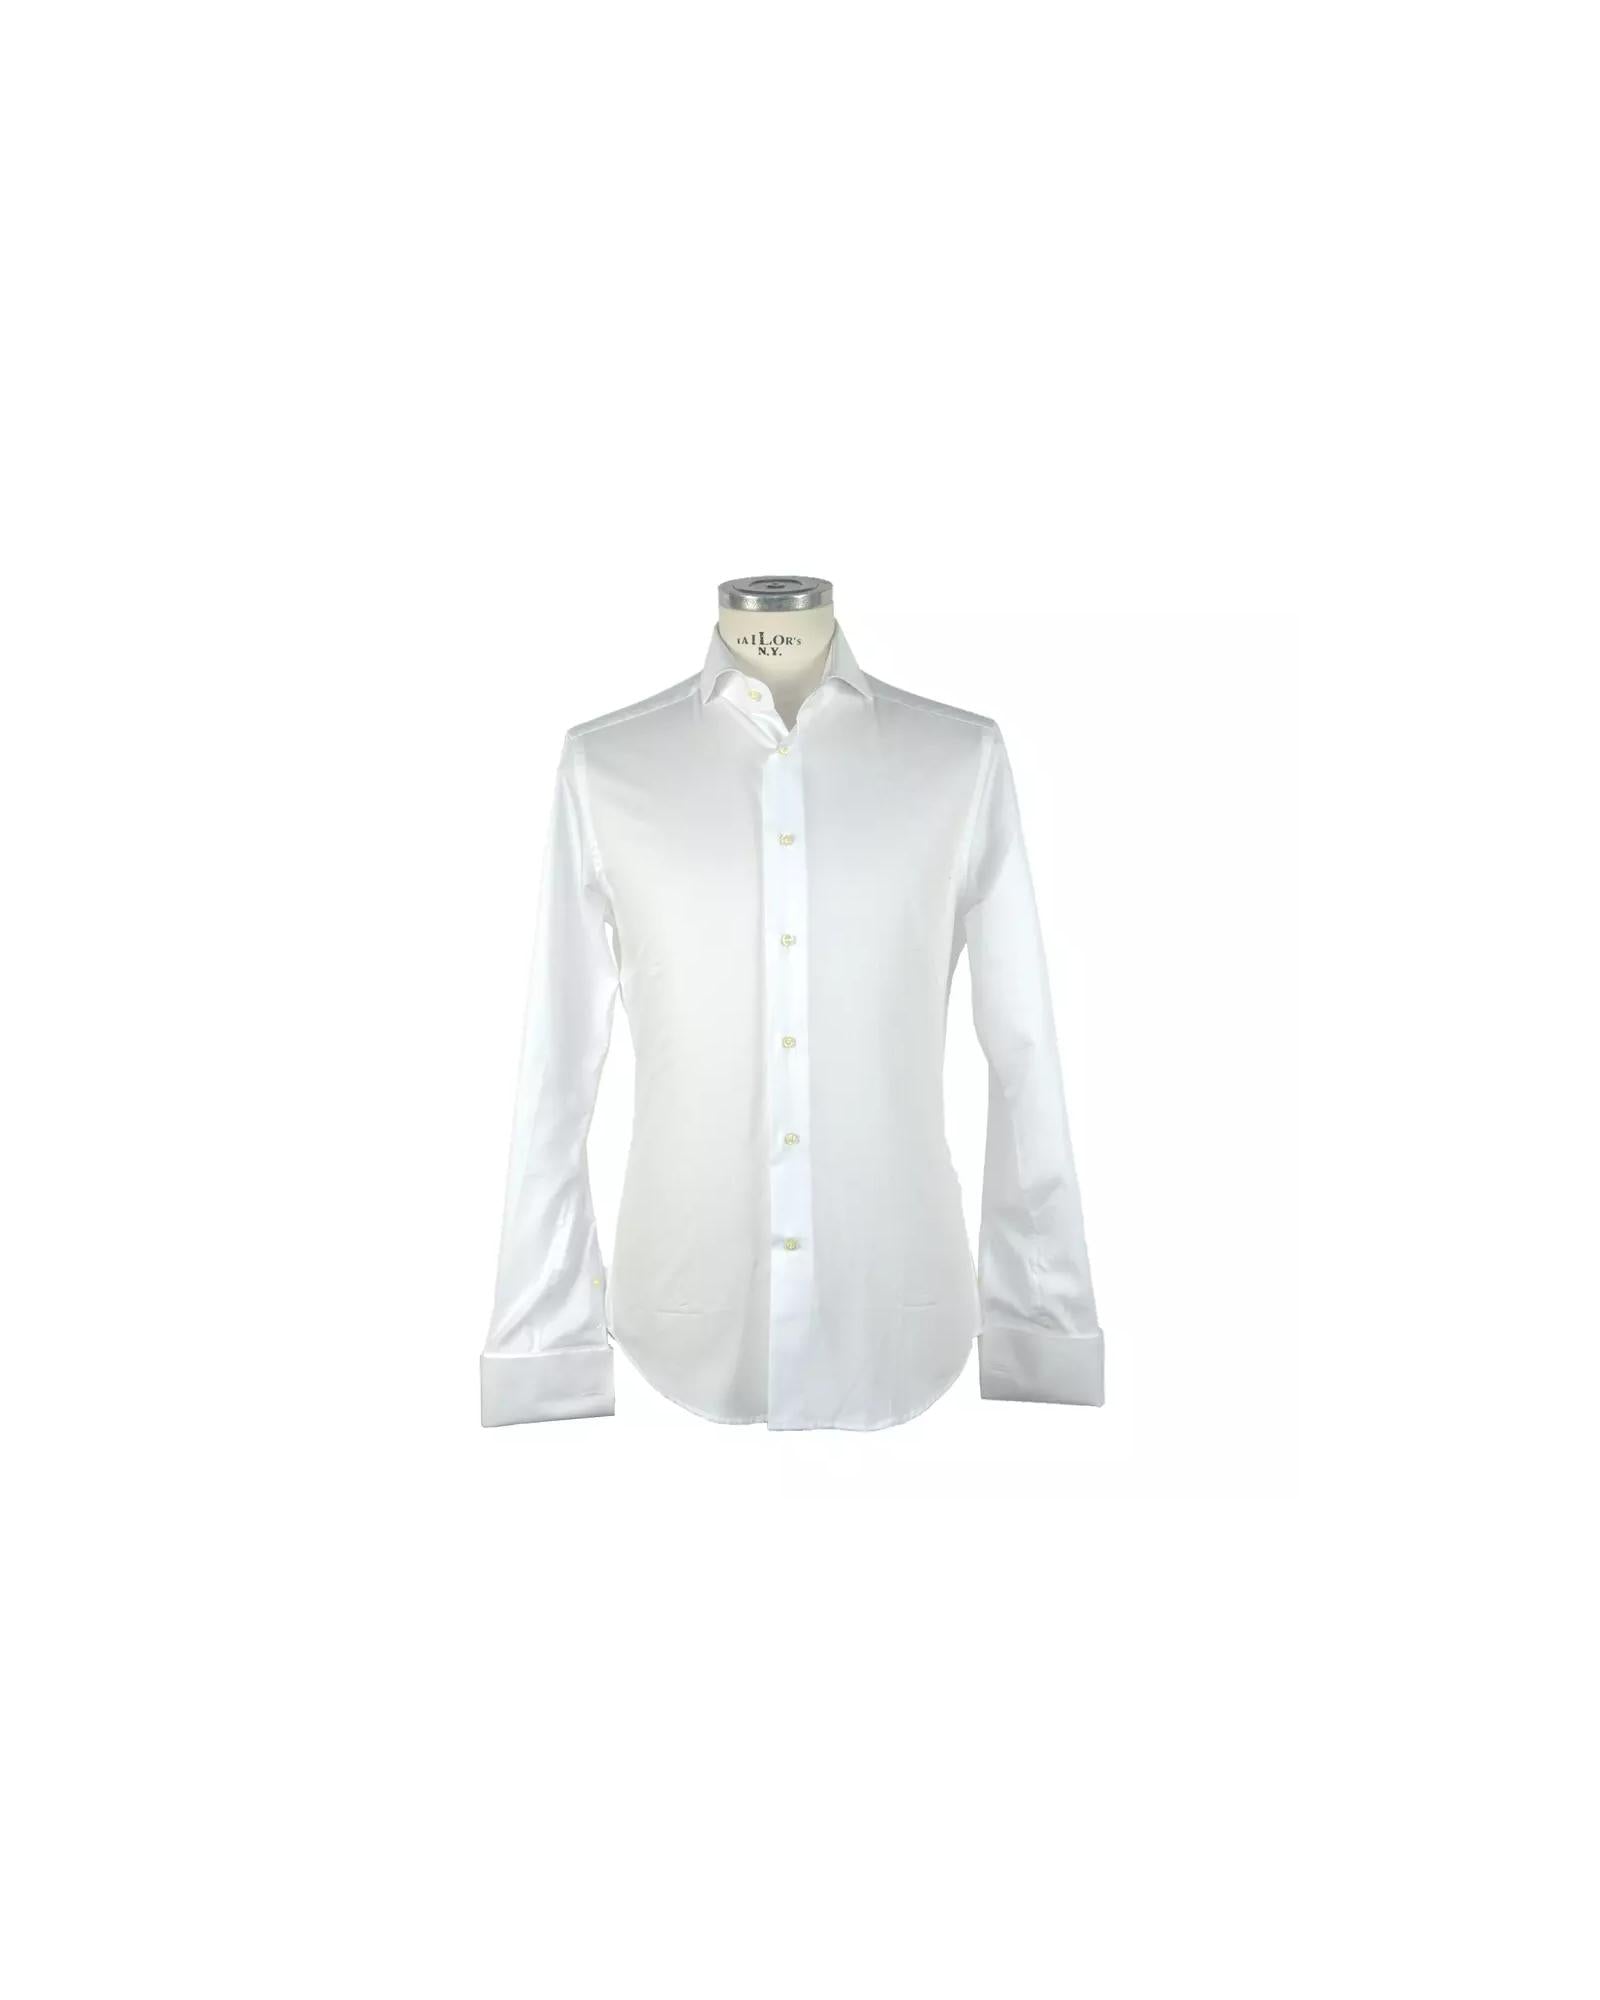 Cotton Ceremony Shirt with French Collar and Button Closure 38 IT Men